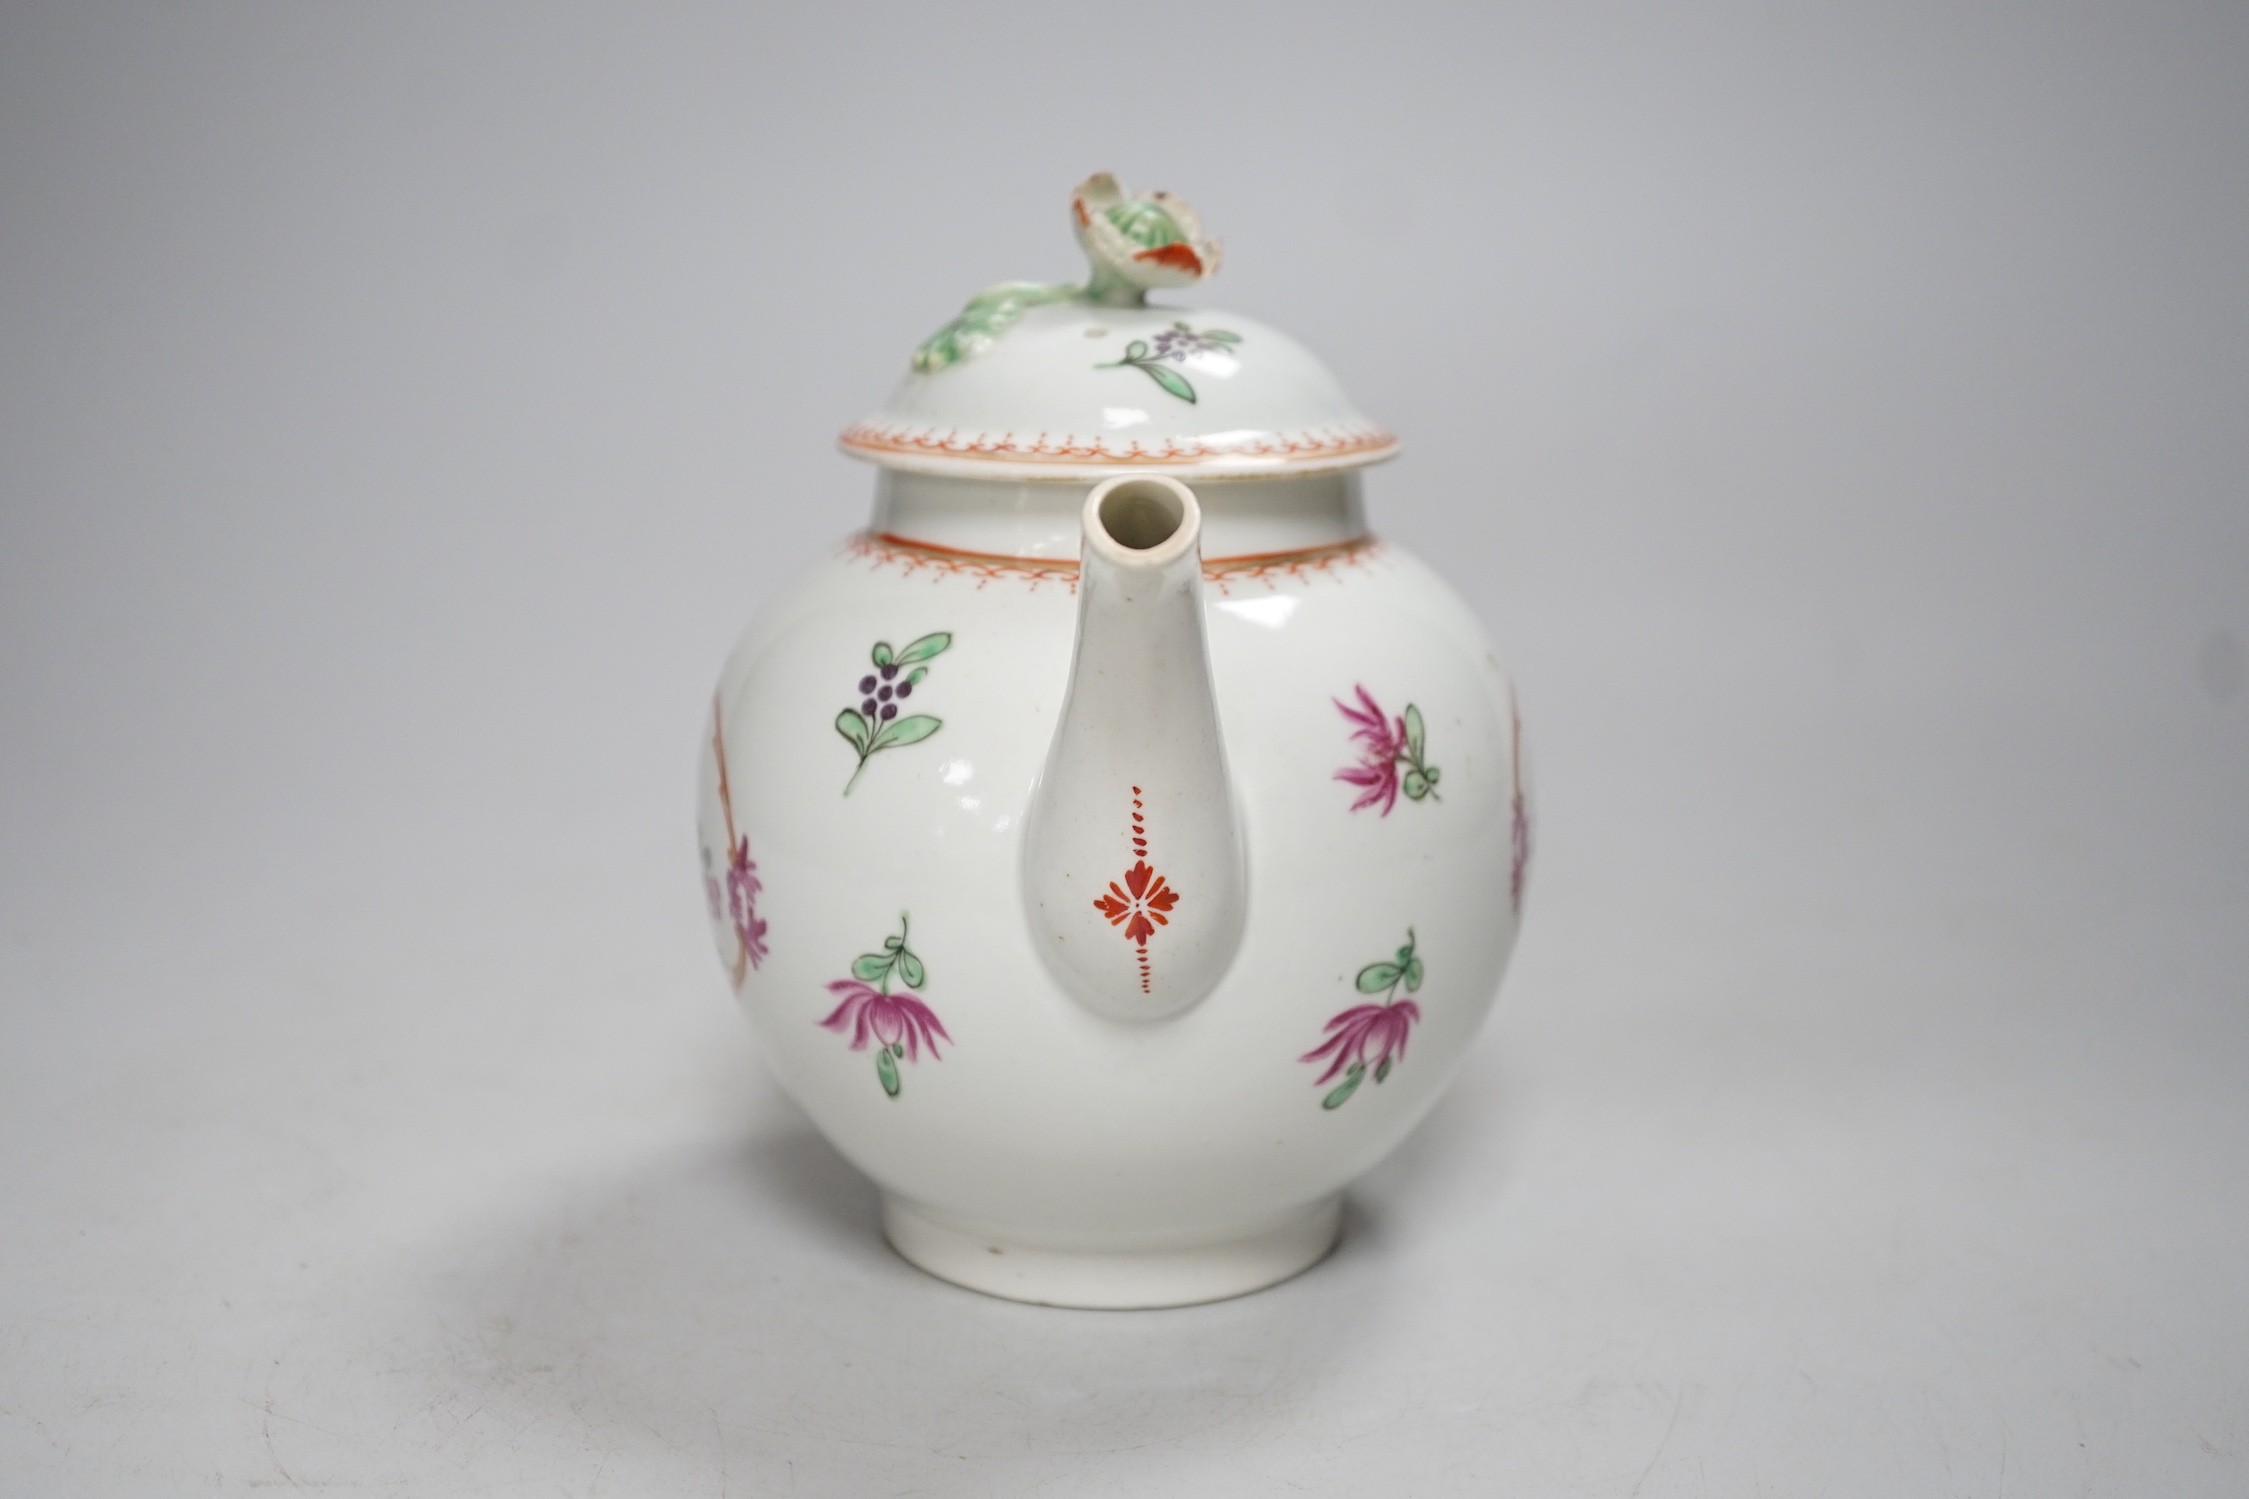 An 18th century Worcester teapot and cover painted in Chinese export style with flowers in an oval - Image 2 of 6